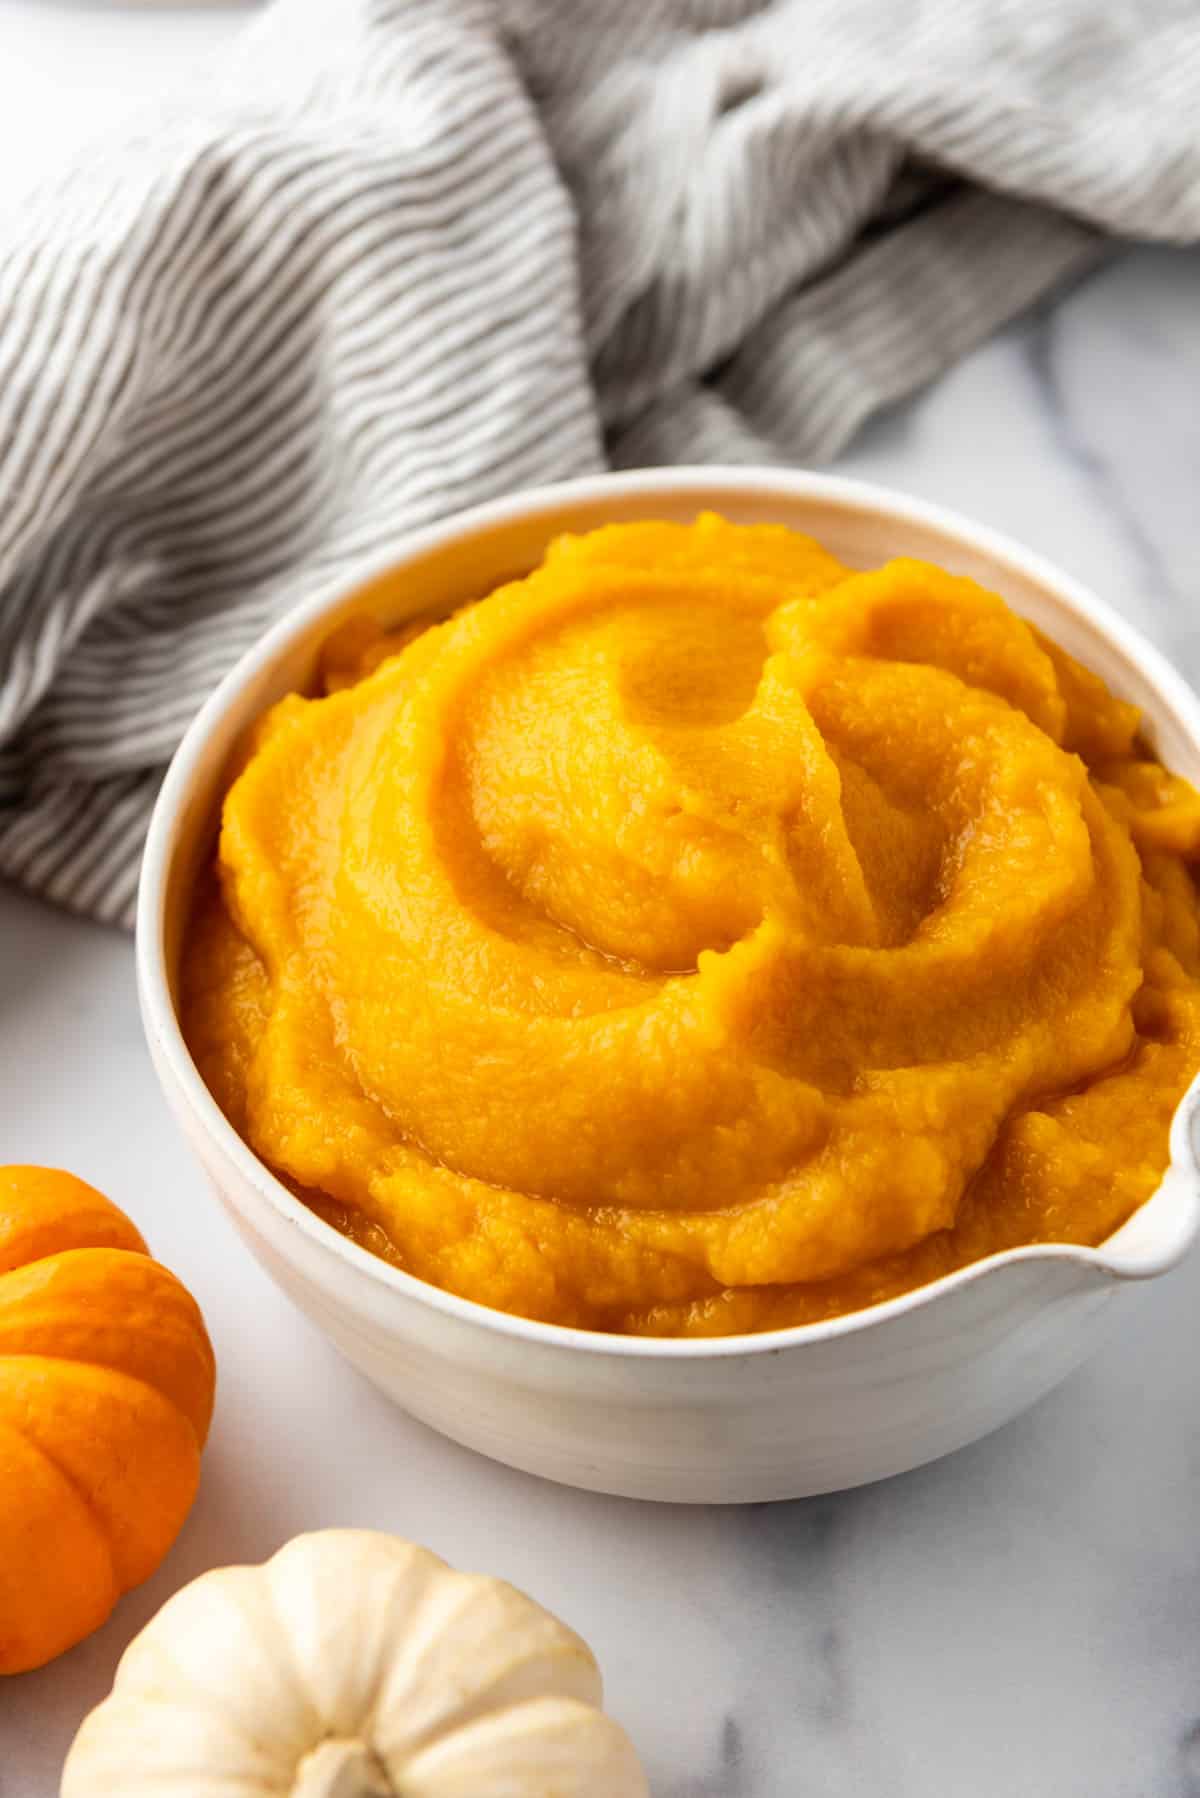 A bowl of homemade pumpkin puree in front of a striped linen napkin.